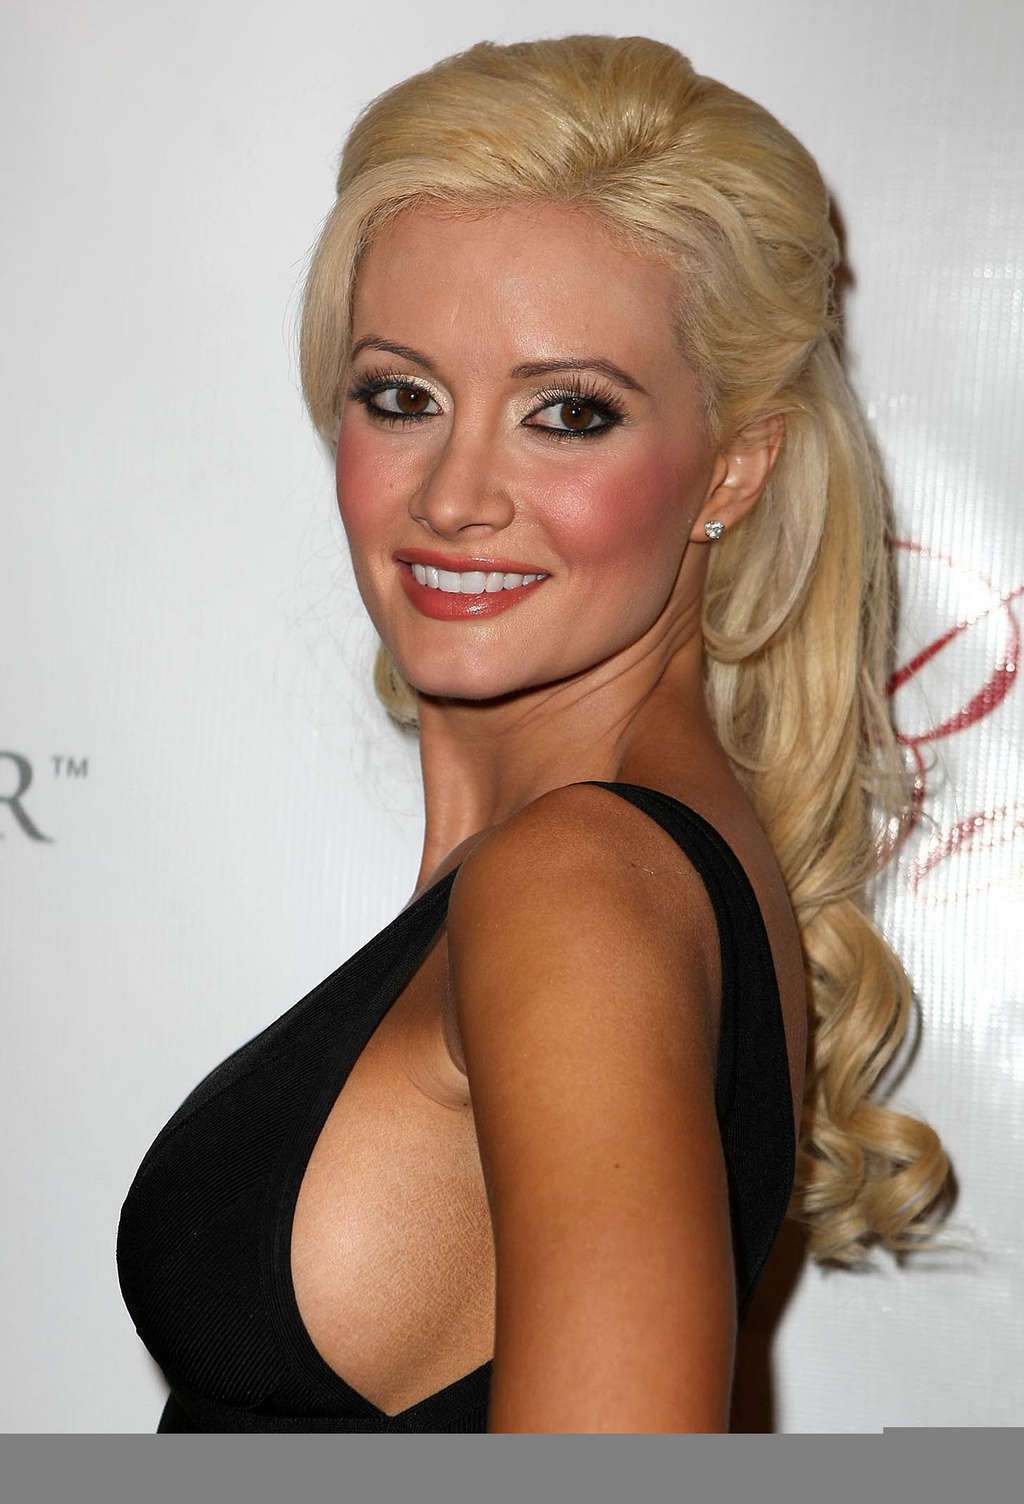 Holly Madison looking very hot and sexy in her evening dress #75371574